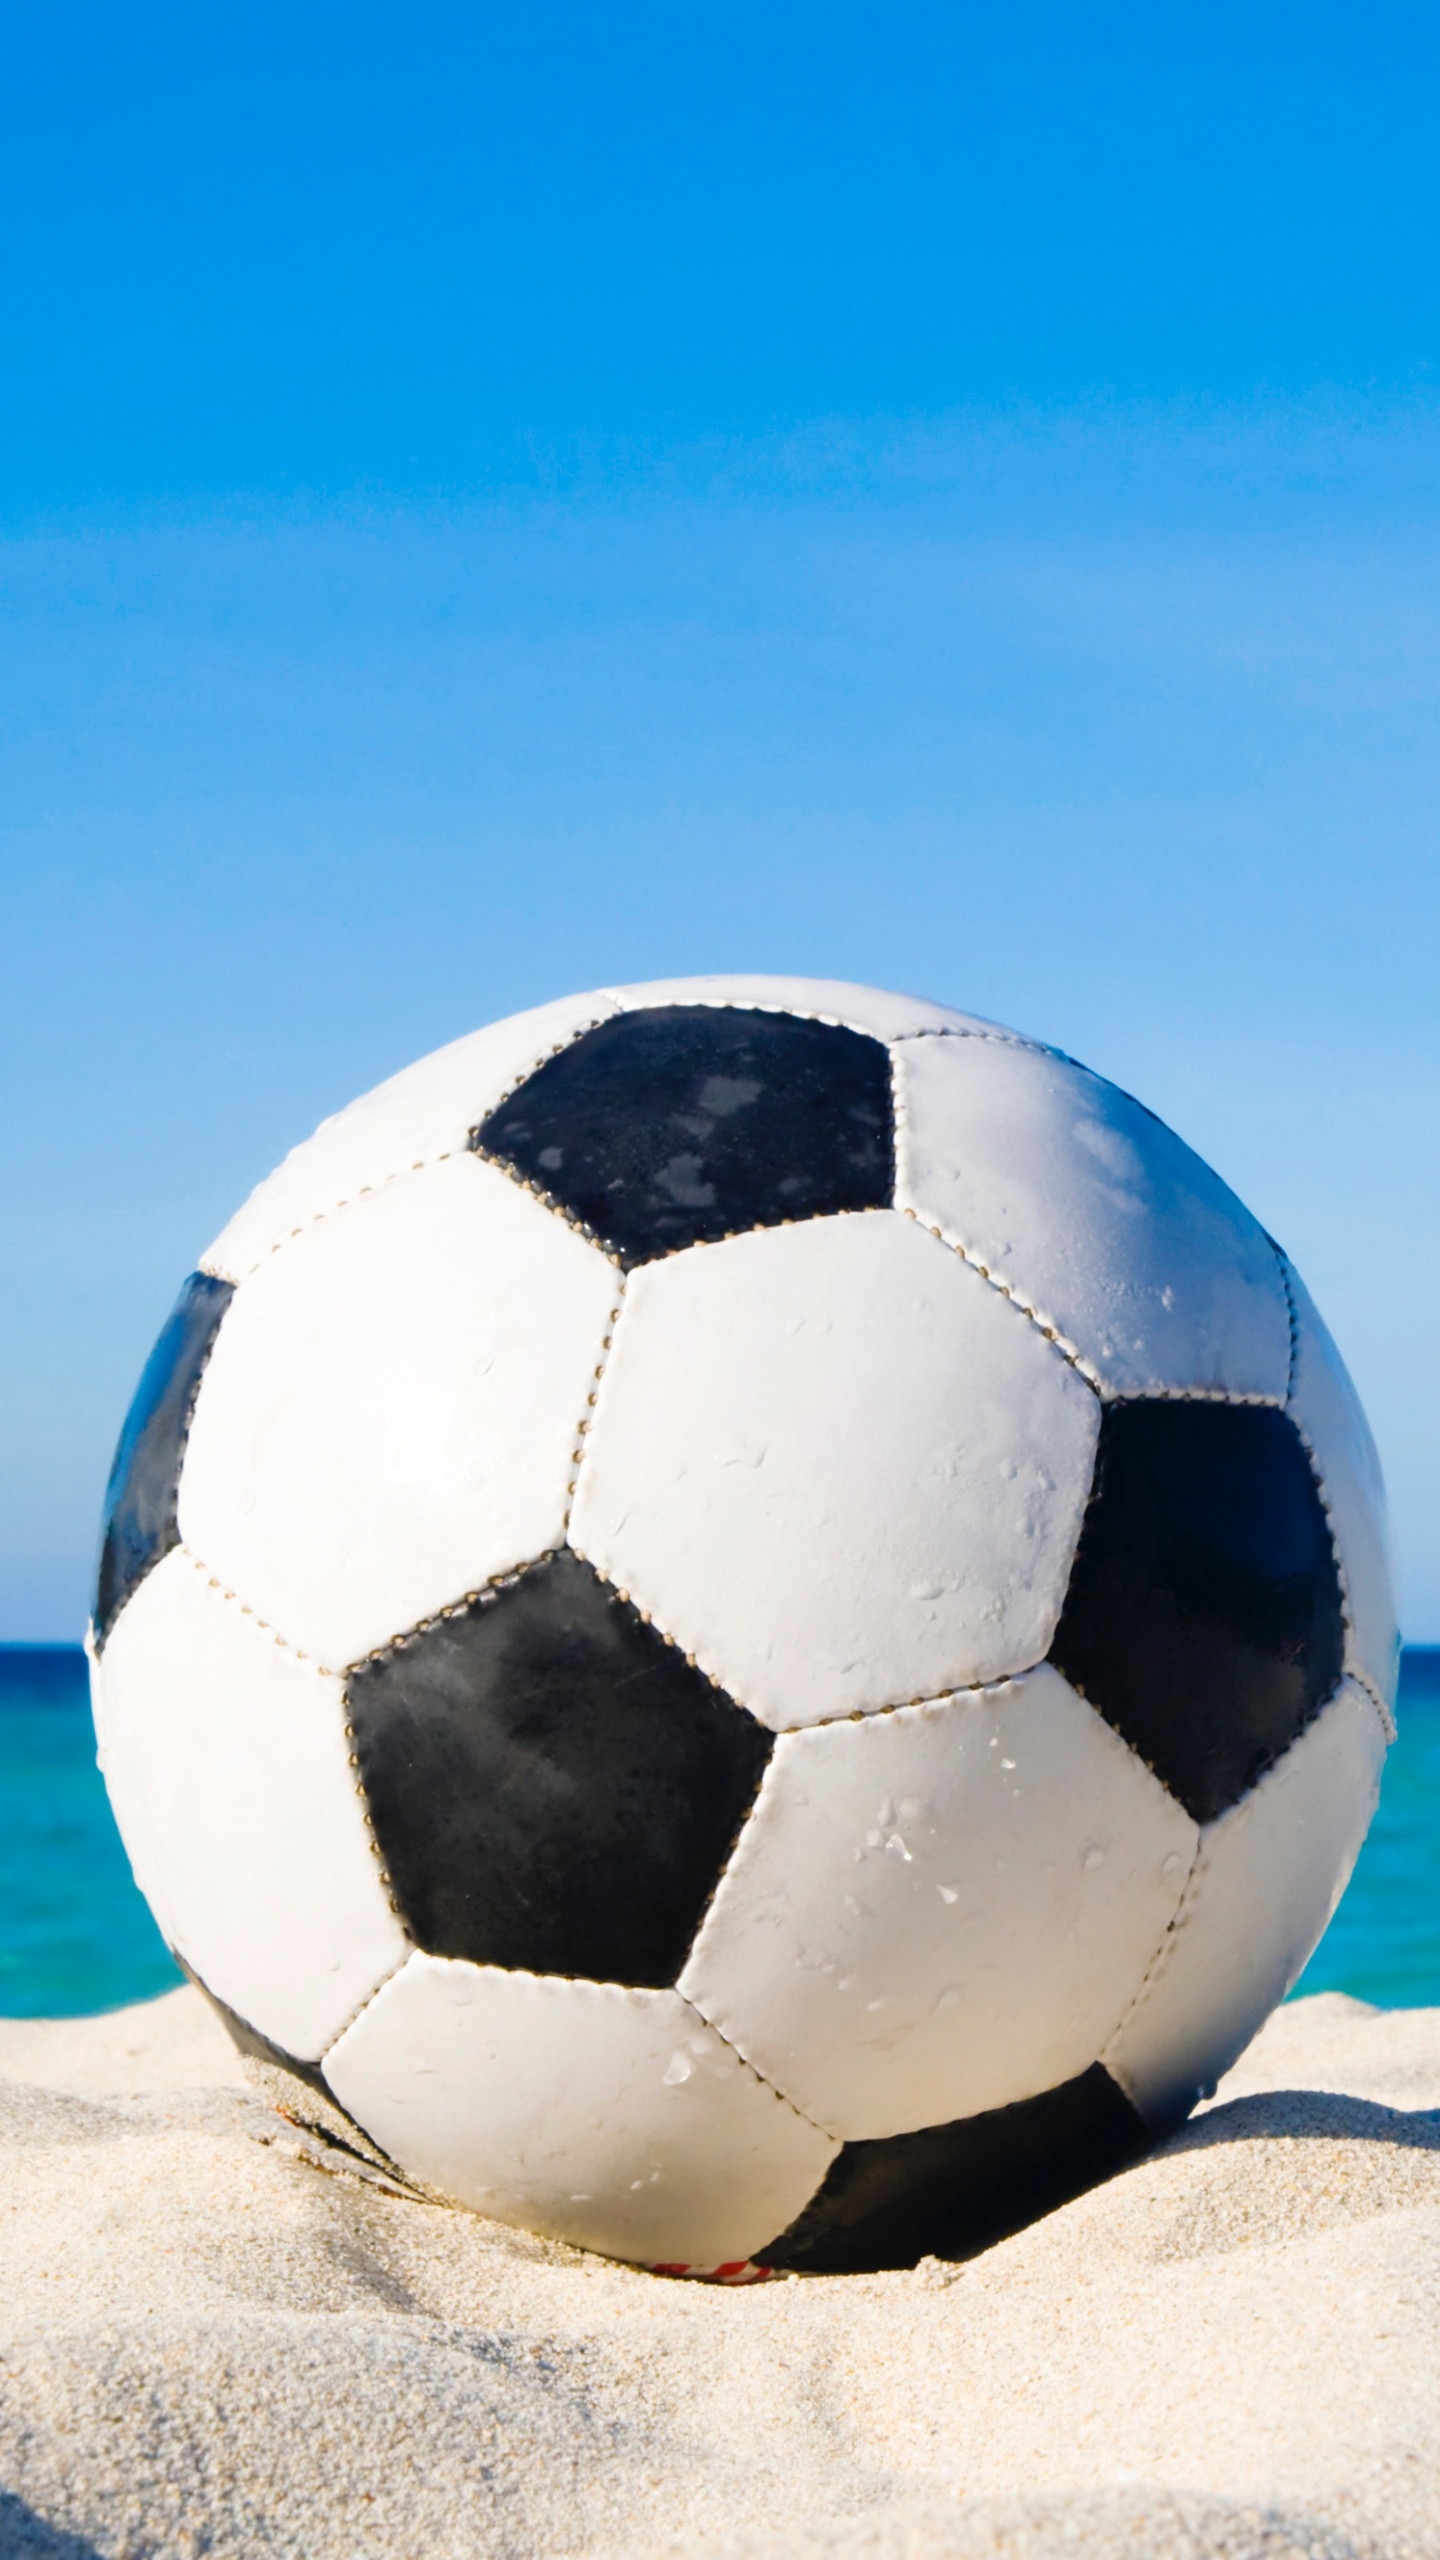 White and Black Soccer Ball on White Sand During Daytime. Wallpaper in 1440x2560 Resolution